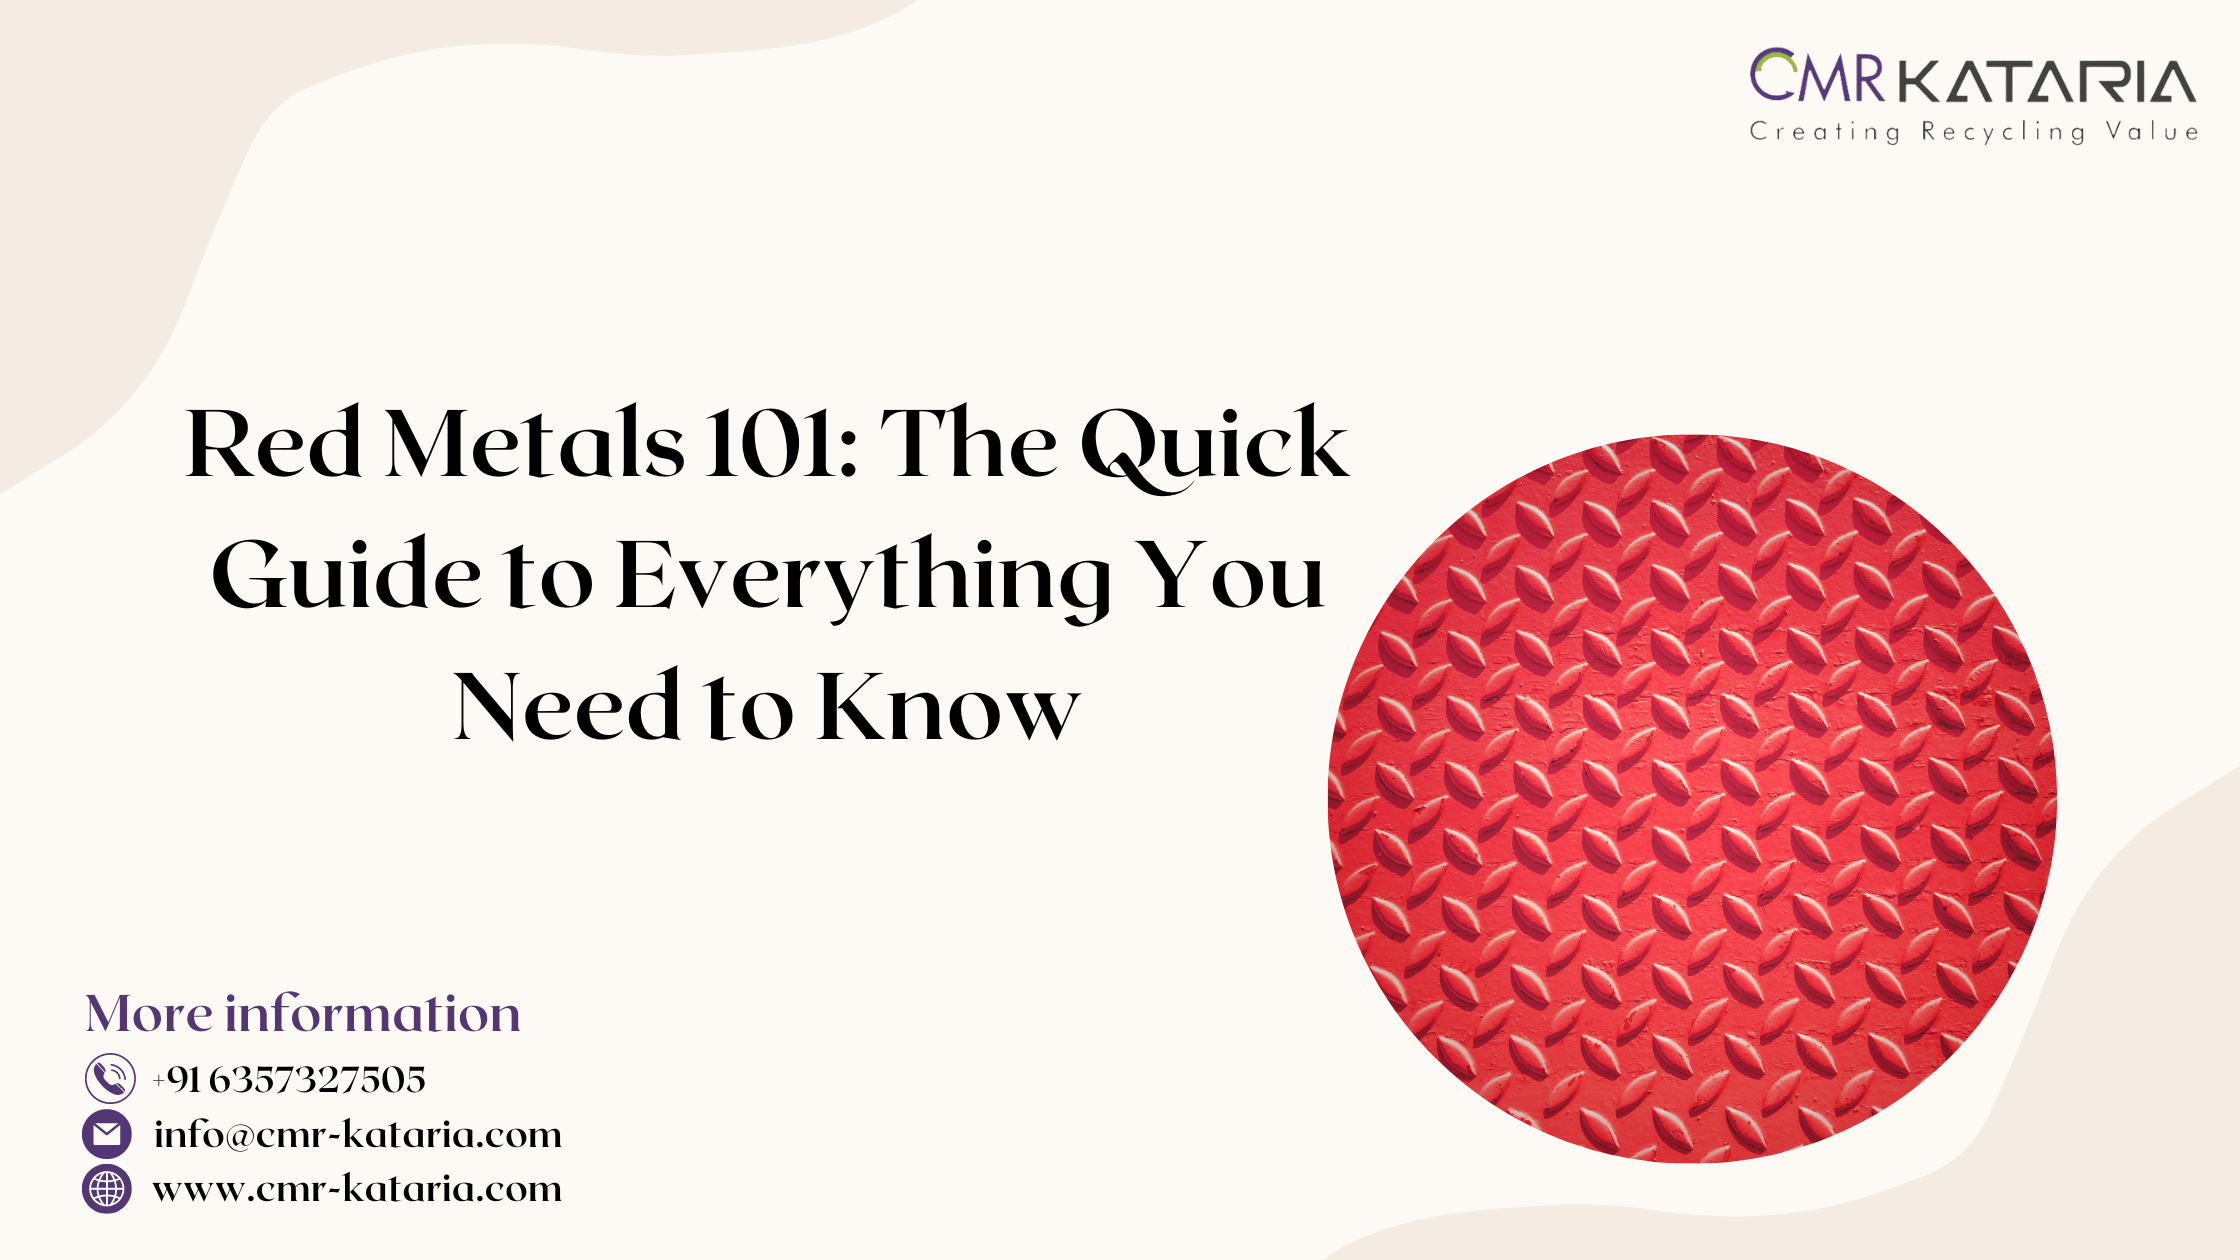 Red Metals 101: The Quick Guide to Everything You Need to Know